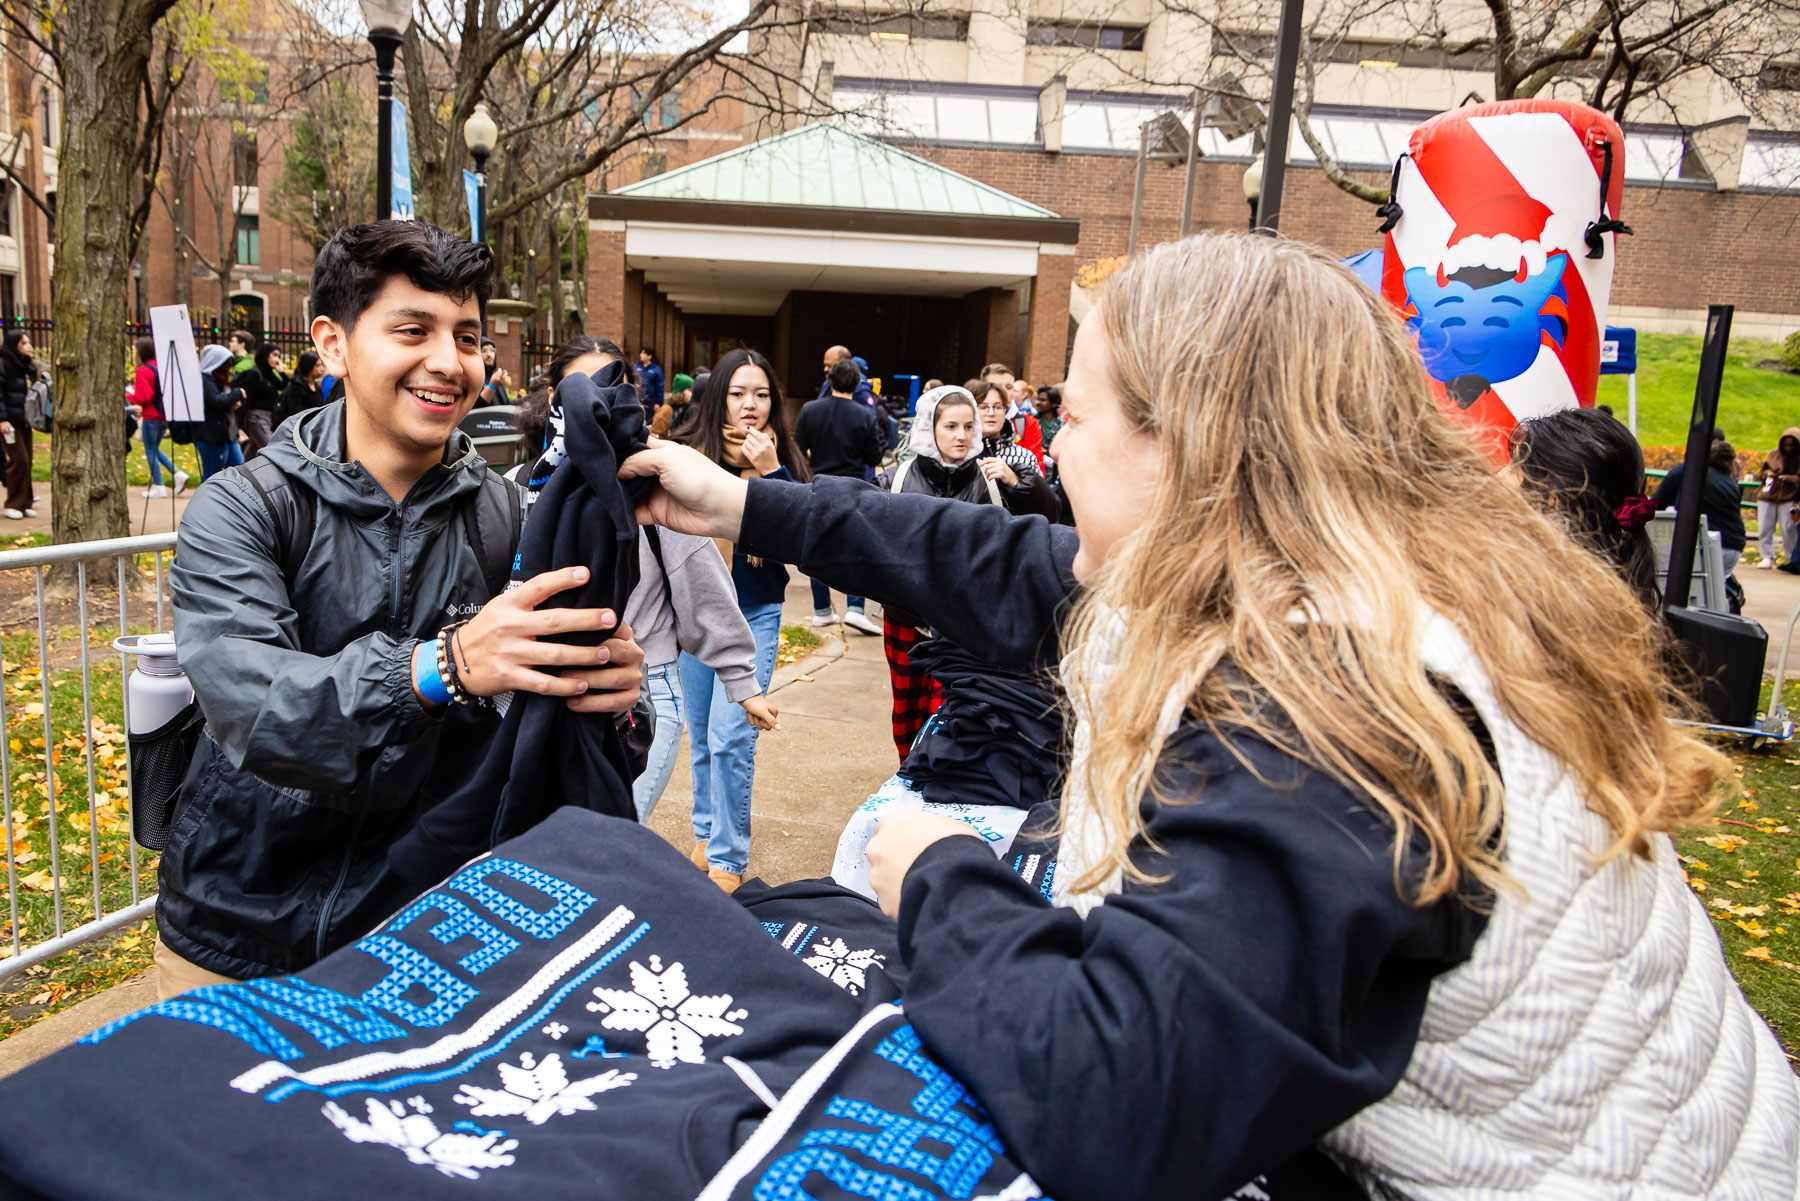 DePaul's famous ugly sweater is highly coveted among students, with some students waiting more than 6 hours prior to opening. (Photo by Jeff Carrion / DePaul University) 